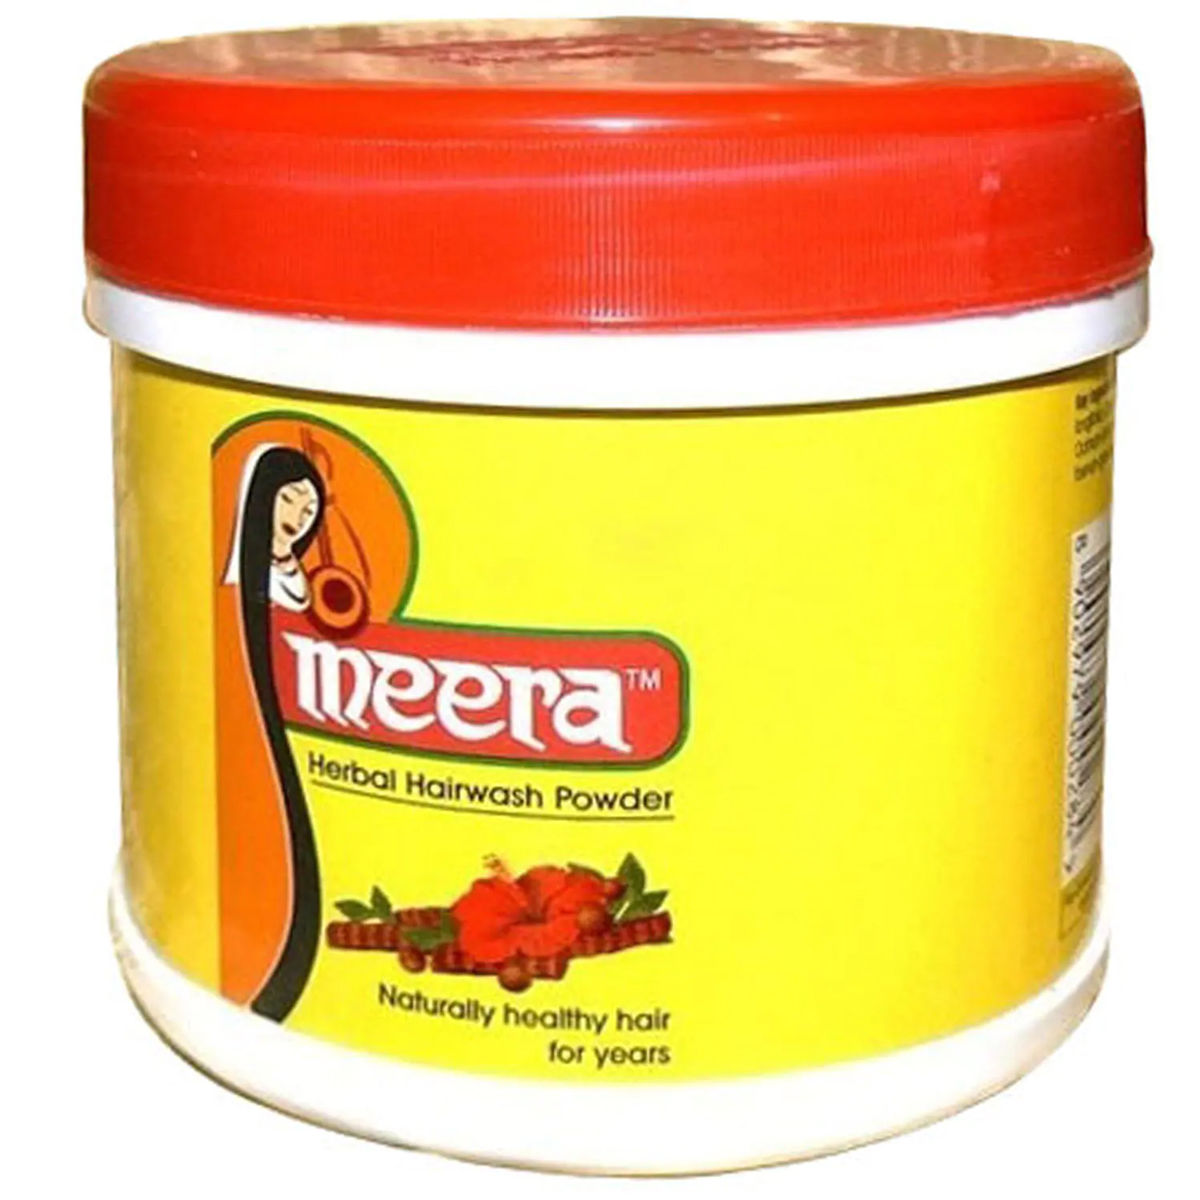 Meera Herbal Hair Wash Powder, 100 gm Jar Price, Uses, Side Effects,  Composition - Apollo Pharmacy